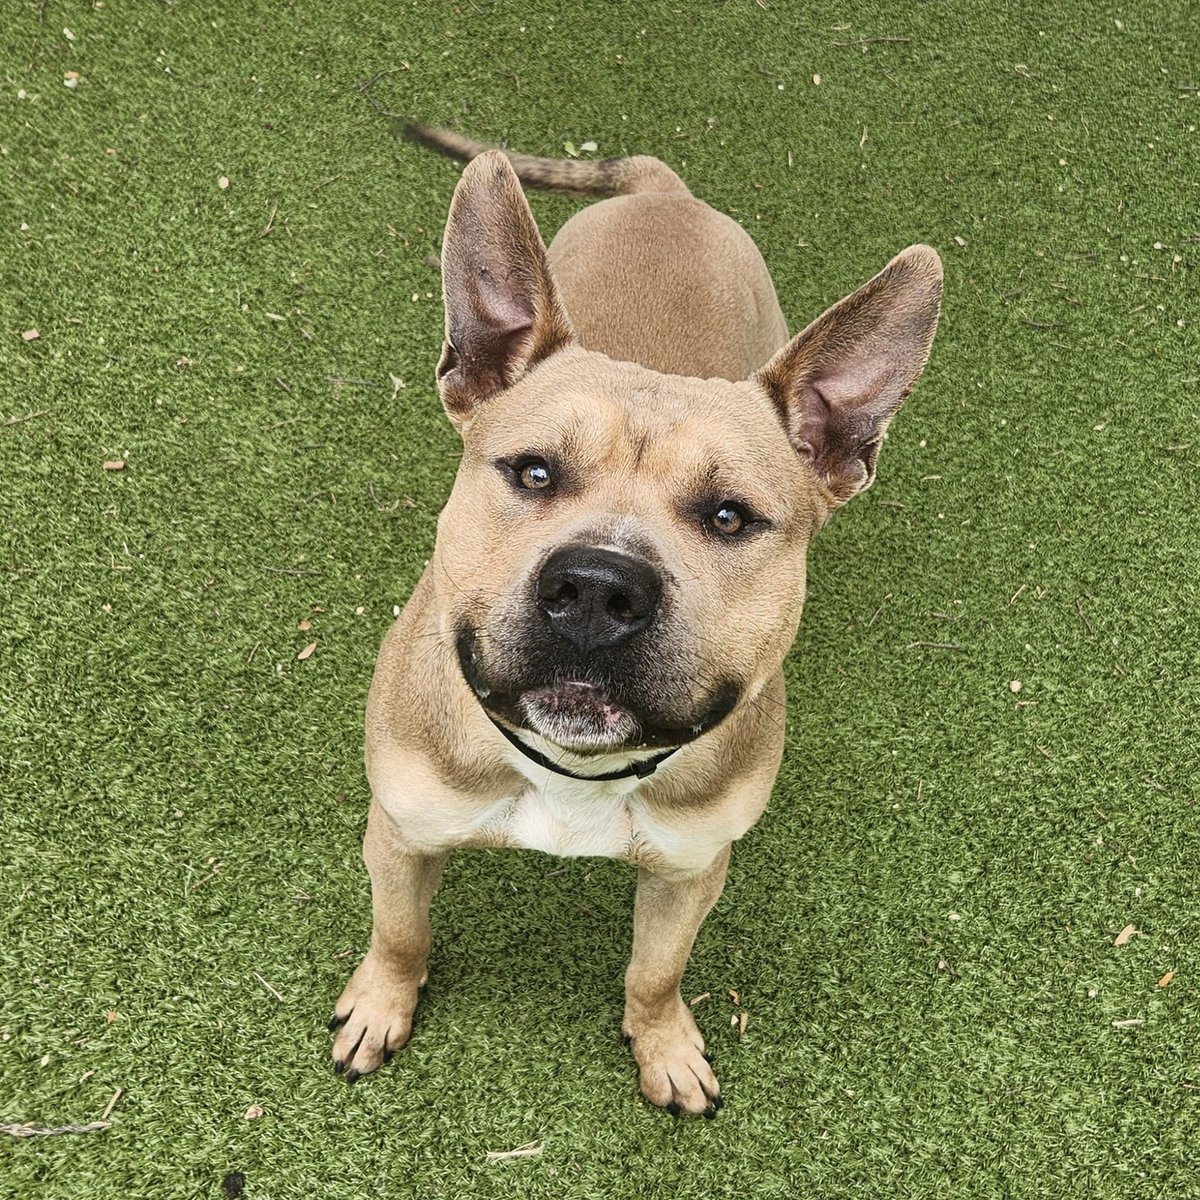 'Hello, my name is Fredward and I'm trying to reach you about your car warranty.' We'd answer the phone for Fredward! This very earnest fellow gets along with both people and dogs, and he's wicked cute to boot. Fredward A900517 is about 2 years old and weighs 63 lbs.